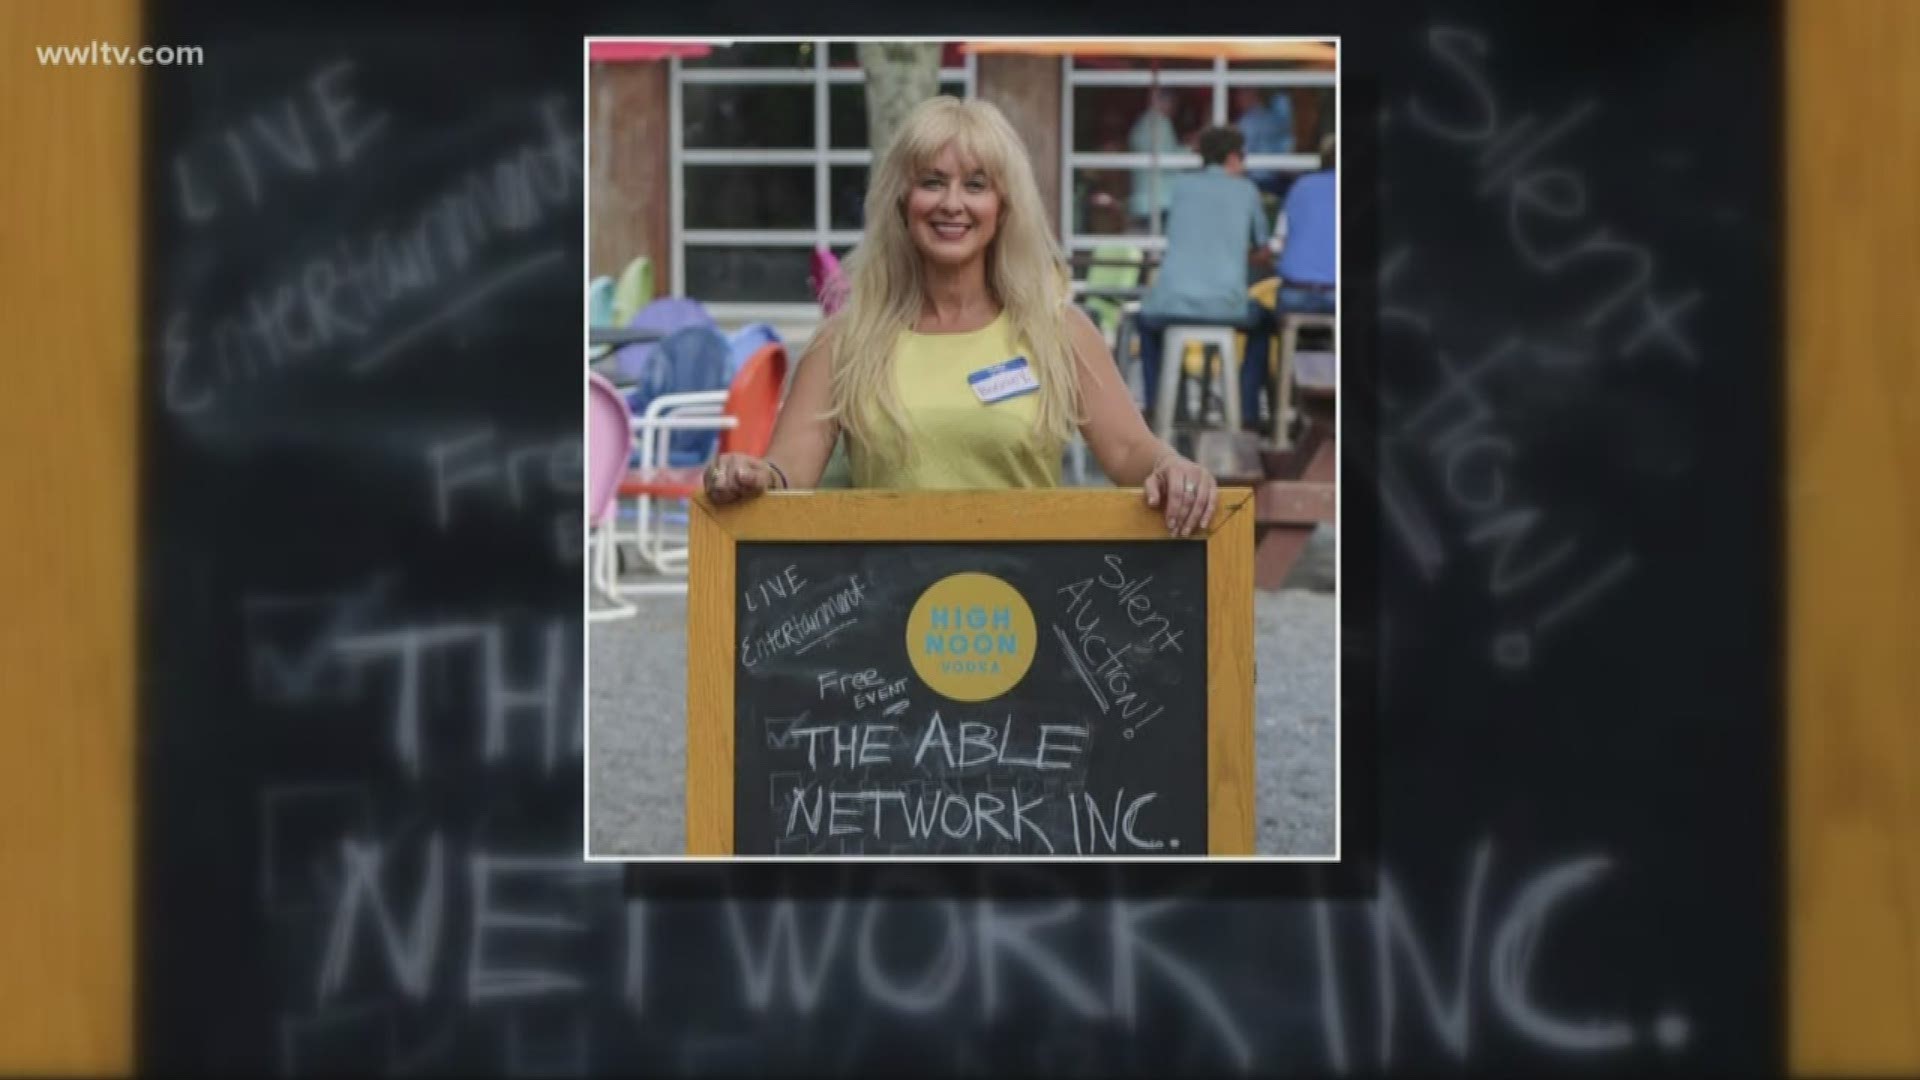 Bonnie Vassalo and her organization "The Able Network" are giving individuals with disabilities or disadvantages the tools needed to enter the job force.